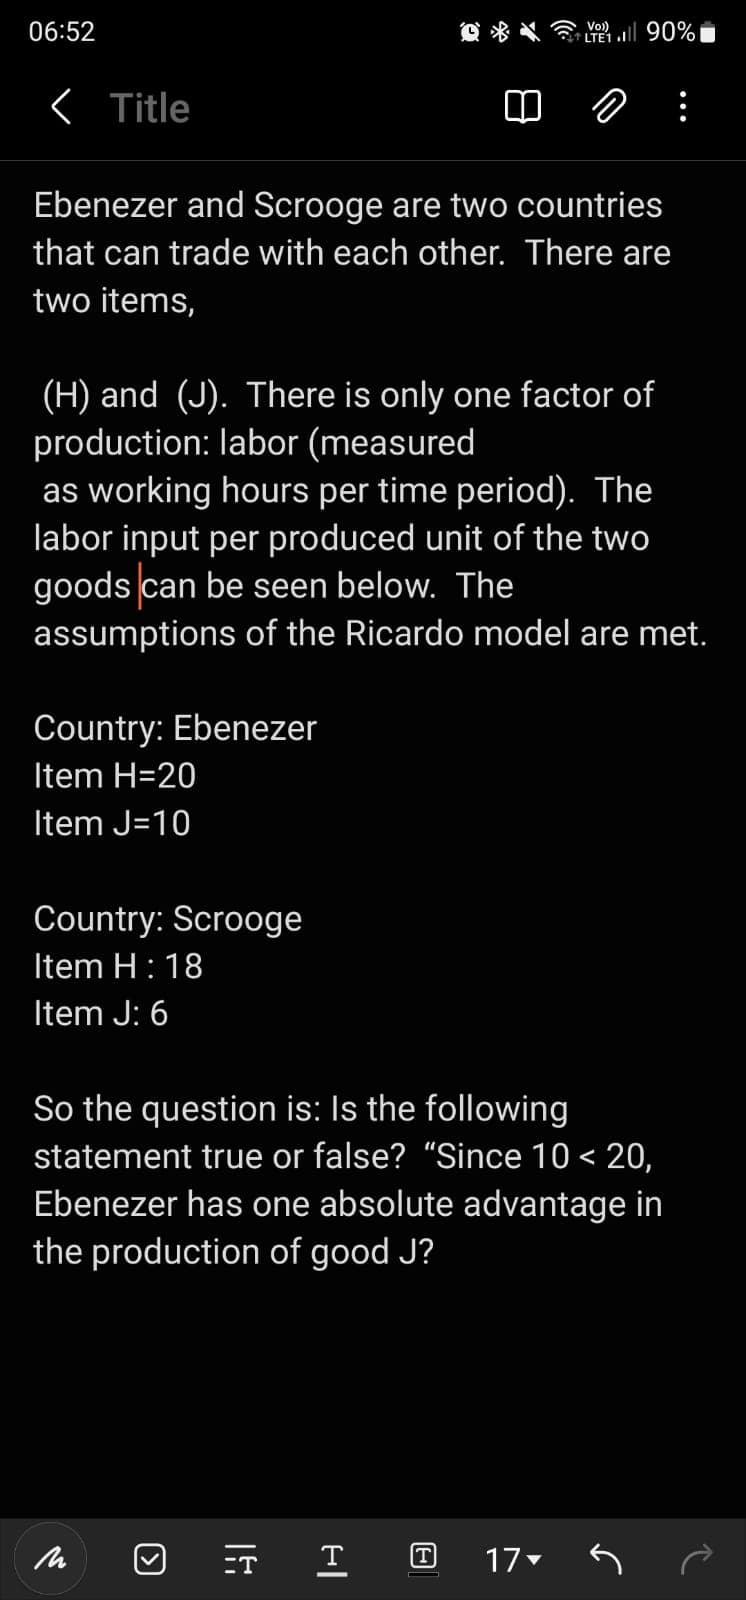 06:52
< Title
Ebenezer and Scrooge are two countries
that can trade with each other. There are
two items,
(H) and (J). There is only one factor of
production: labor (measured
as working hours per time period). The
labor input per produced unit of the two
goods can be seen below. The
assumptions of the Ricardo model are met.
Country: Ebenezer
Item H=20
Item J=10
Country: Scrooge
Item H: 18
Item J: 6
So the question is: Is the following
statement true or false? “Since 10 < 20,
Ebenezer has one absolute advantage in
the production of good J?
(
=T
Vo))
LTE1 .Il 90%
|4
T (T)
17▼